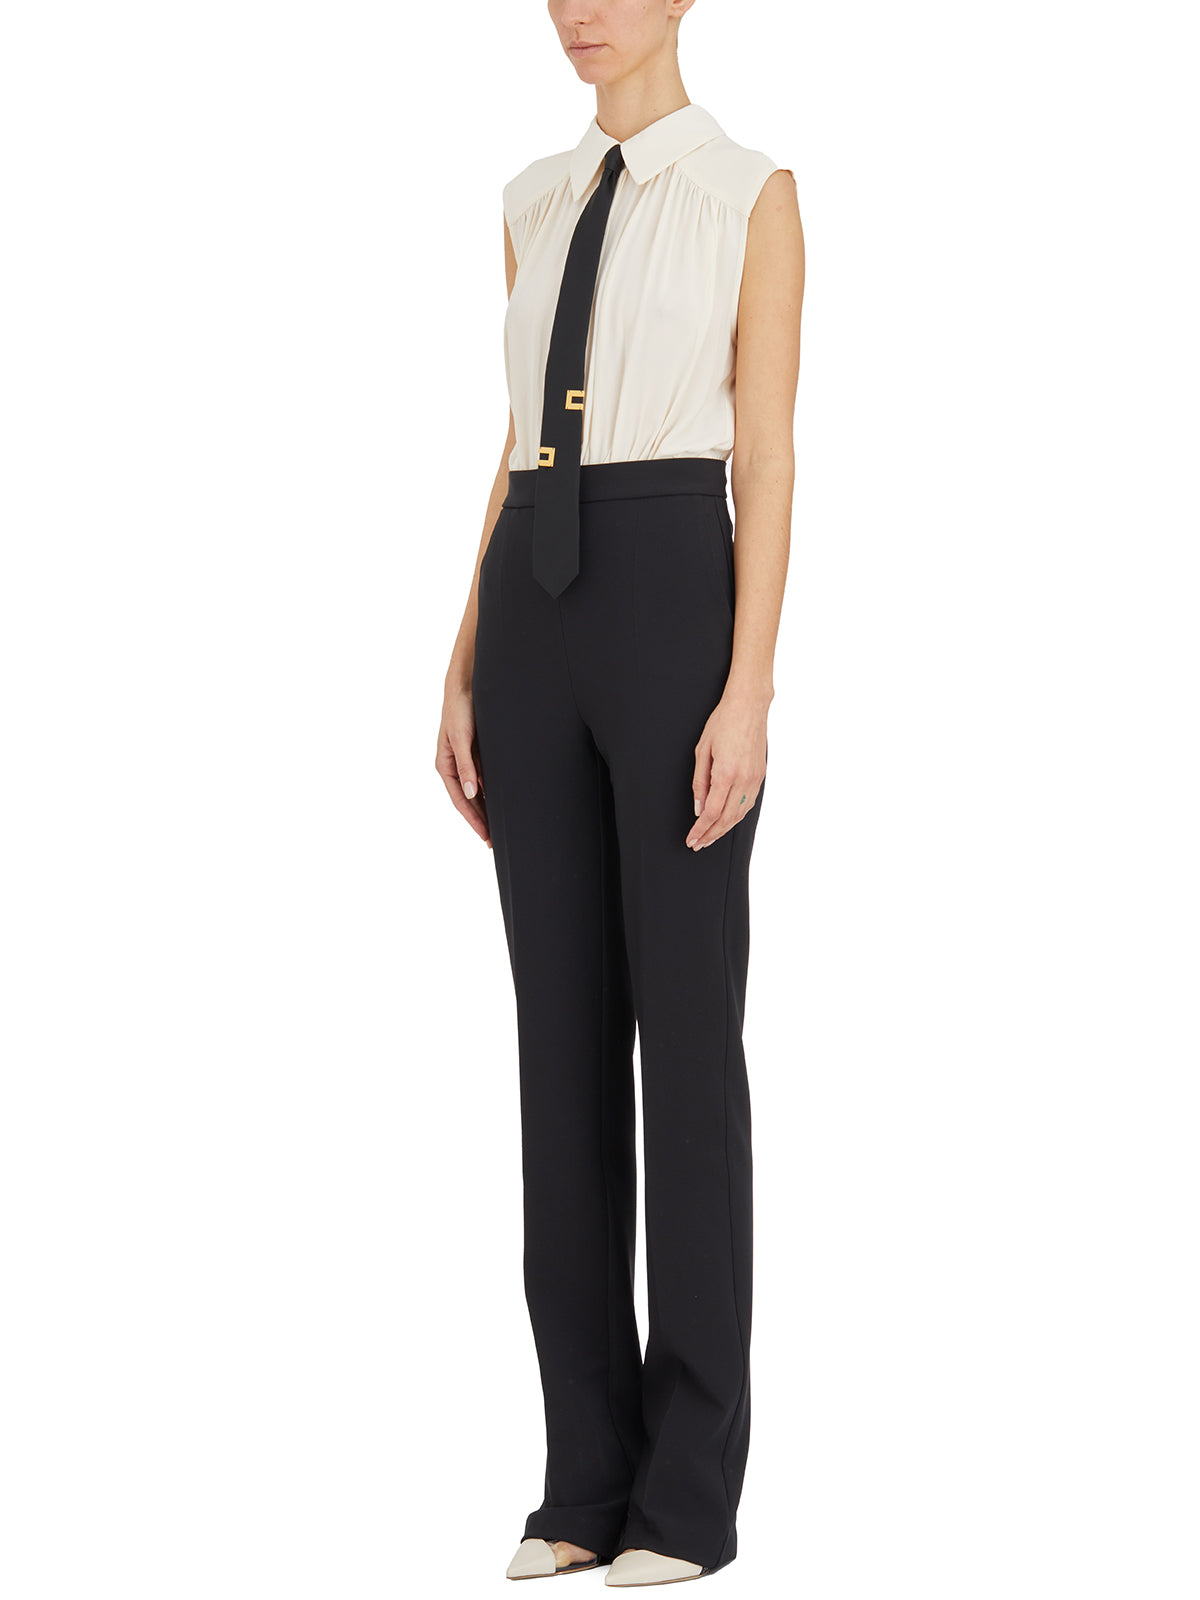 ELISABETTA FRANCHI Black and White Women's Jumpsuit with Padded Straps and Invisible Zipper